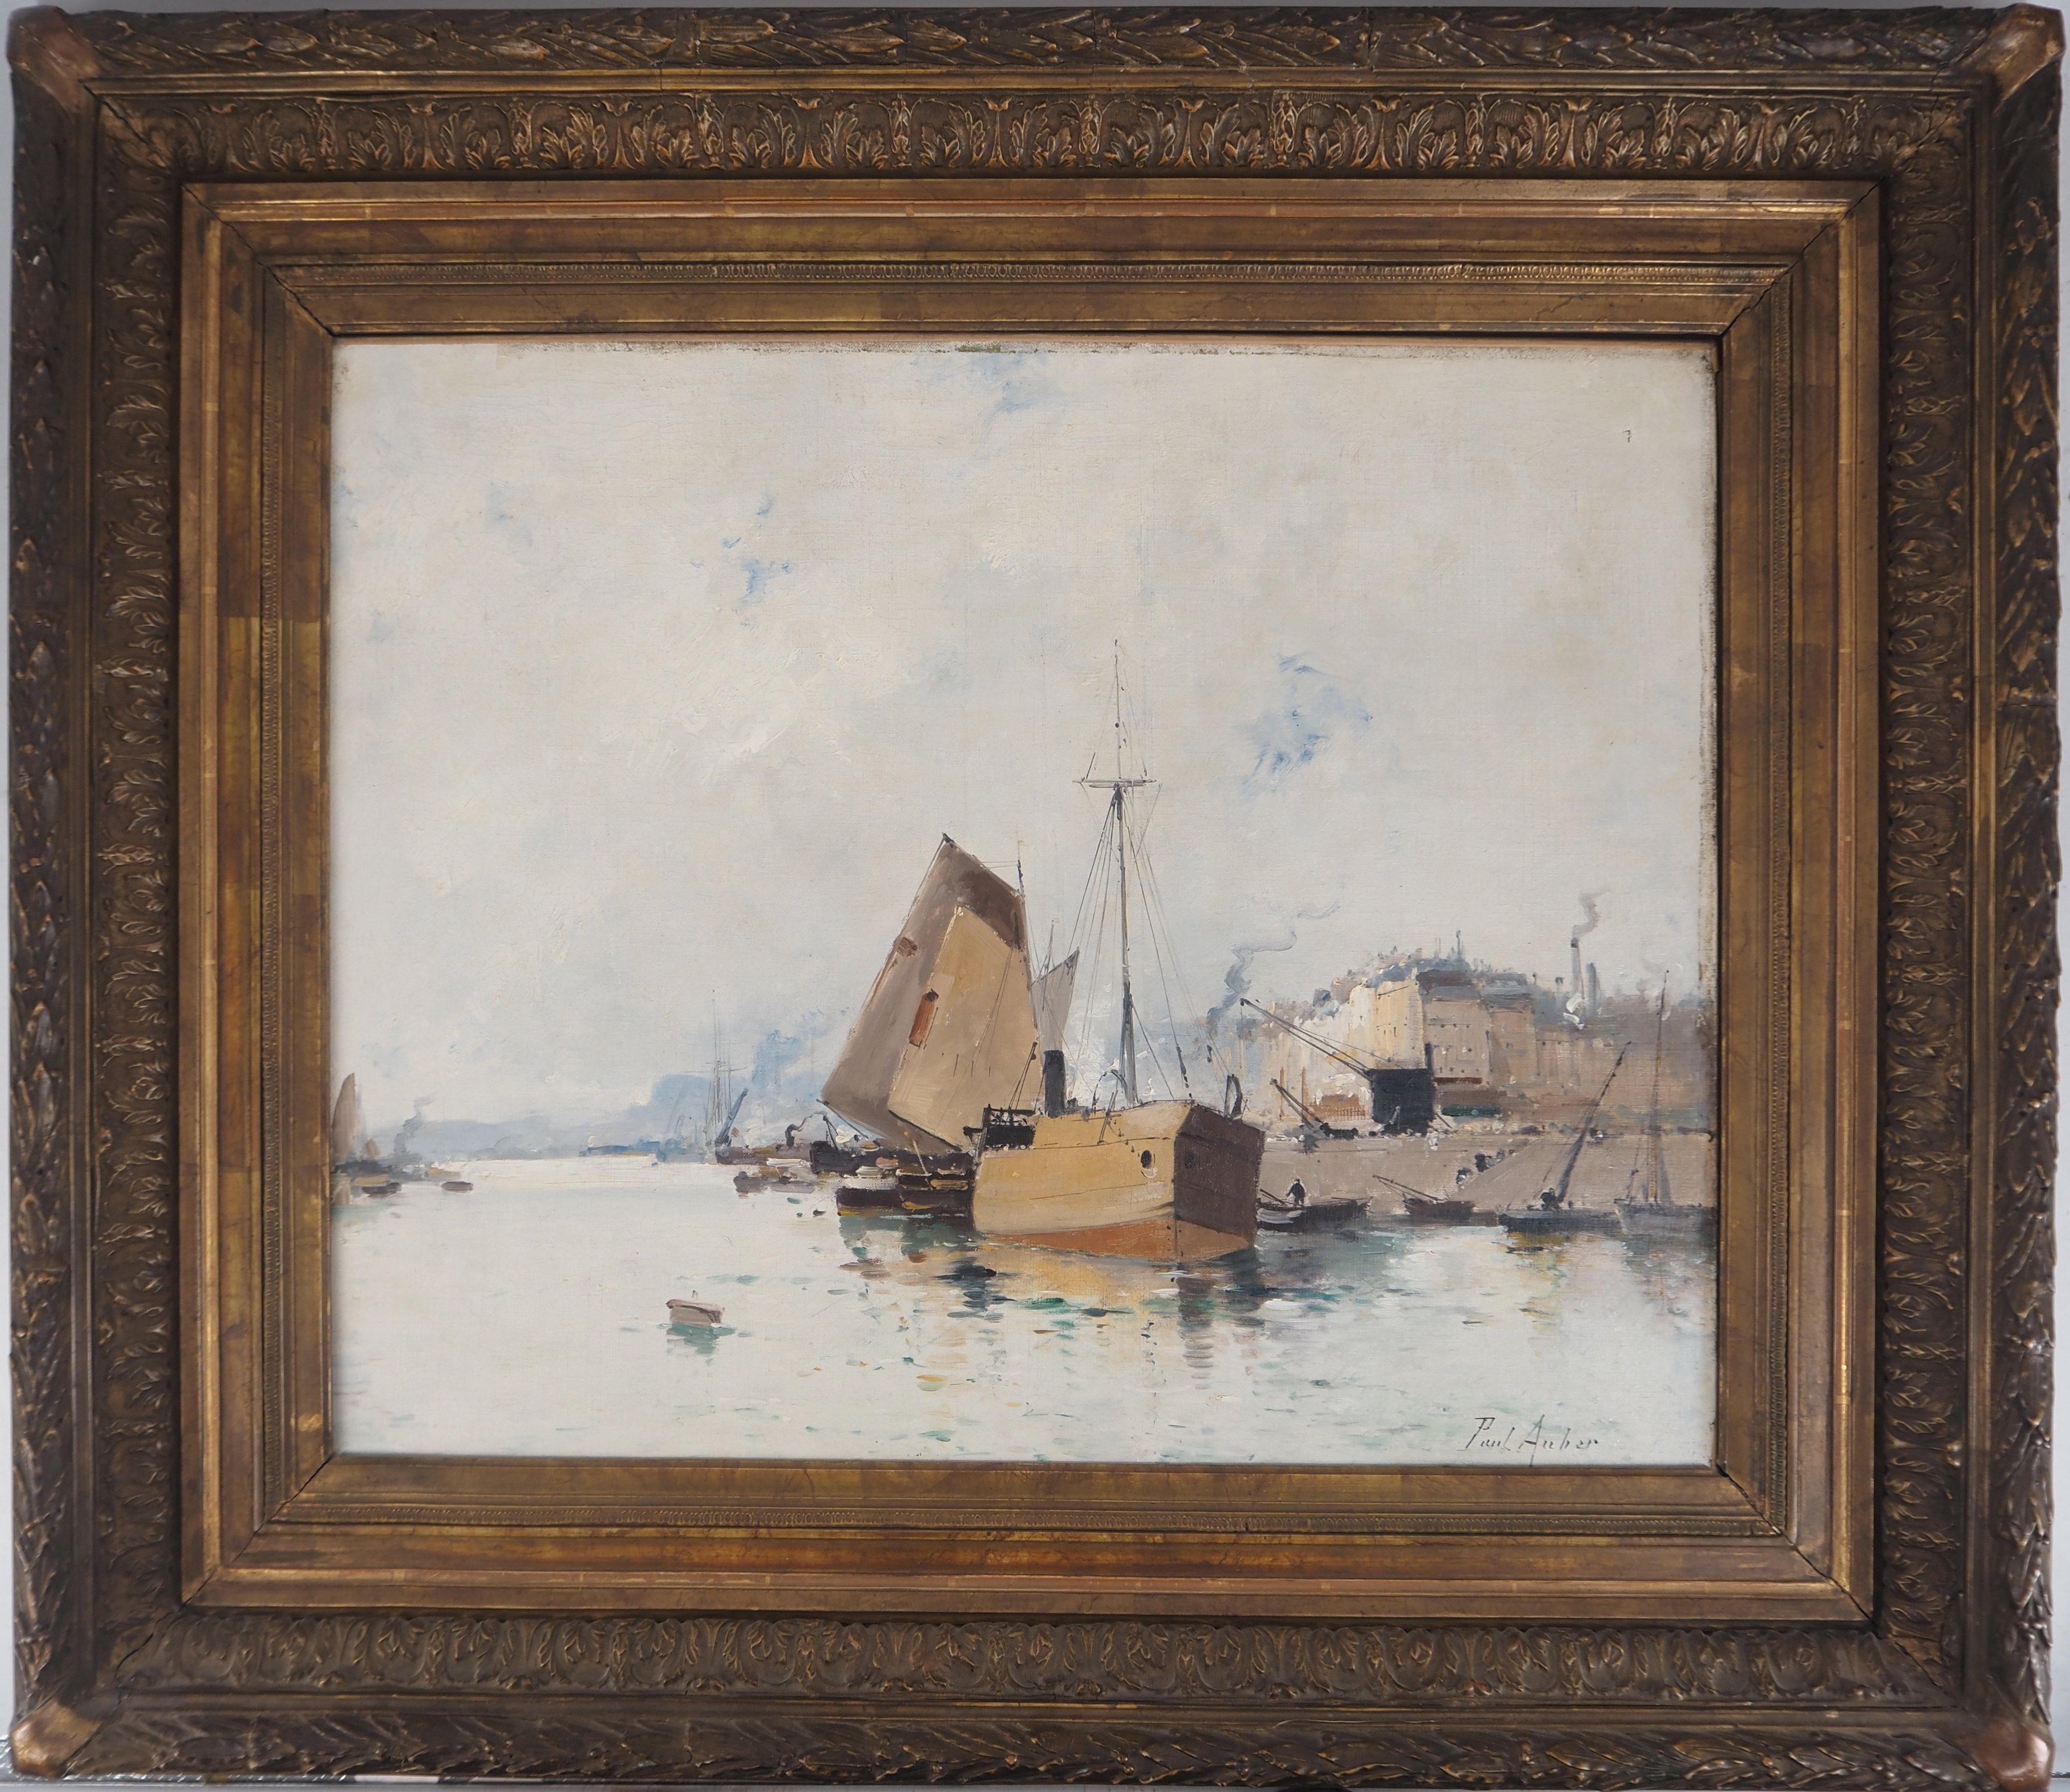 Eugene Galien-Laloue Landscape Painting - Boats Leaving the Harbor - Original painting on canvas - Signed